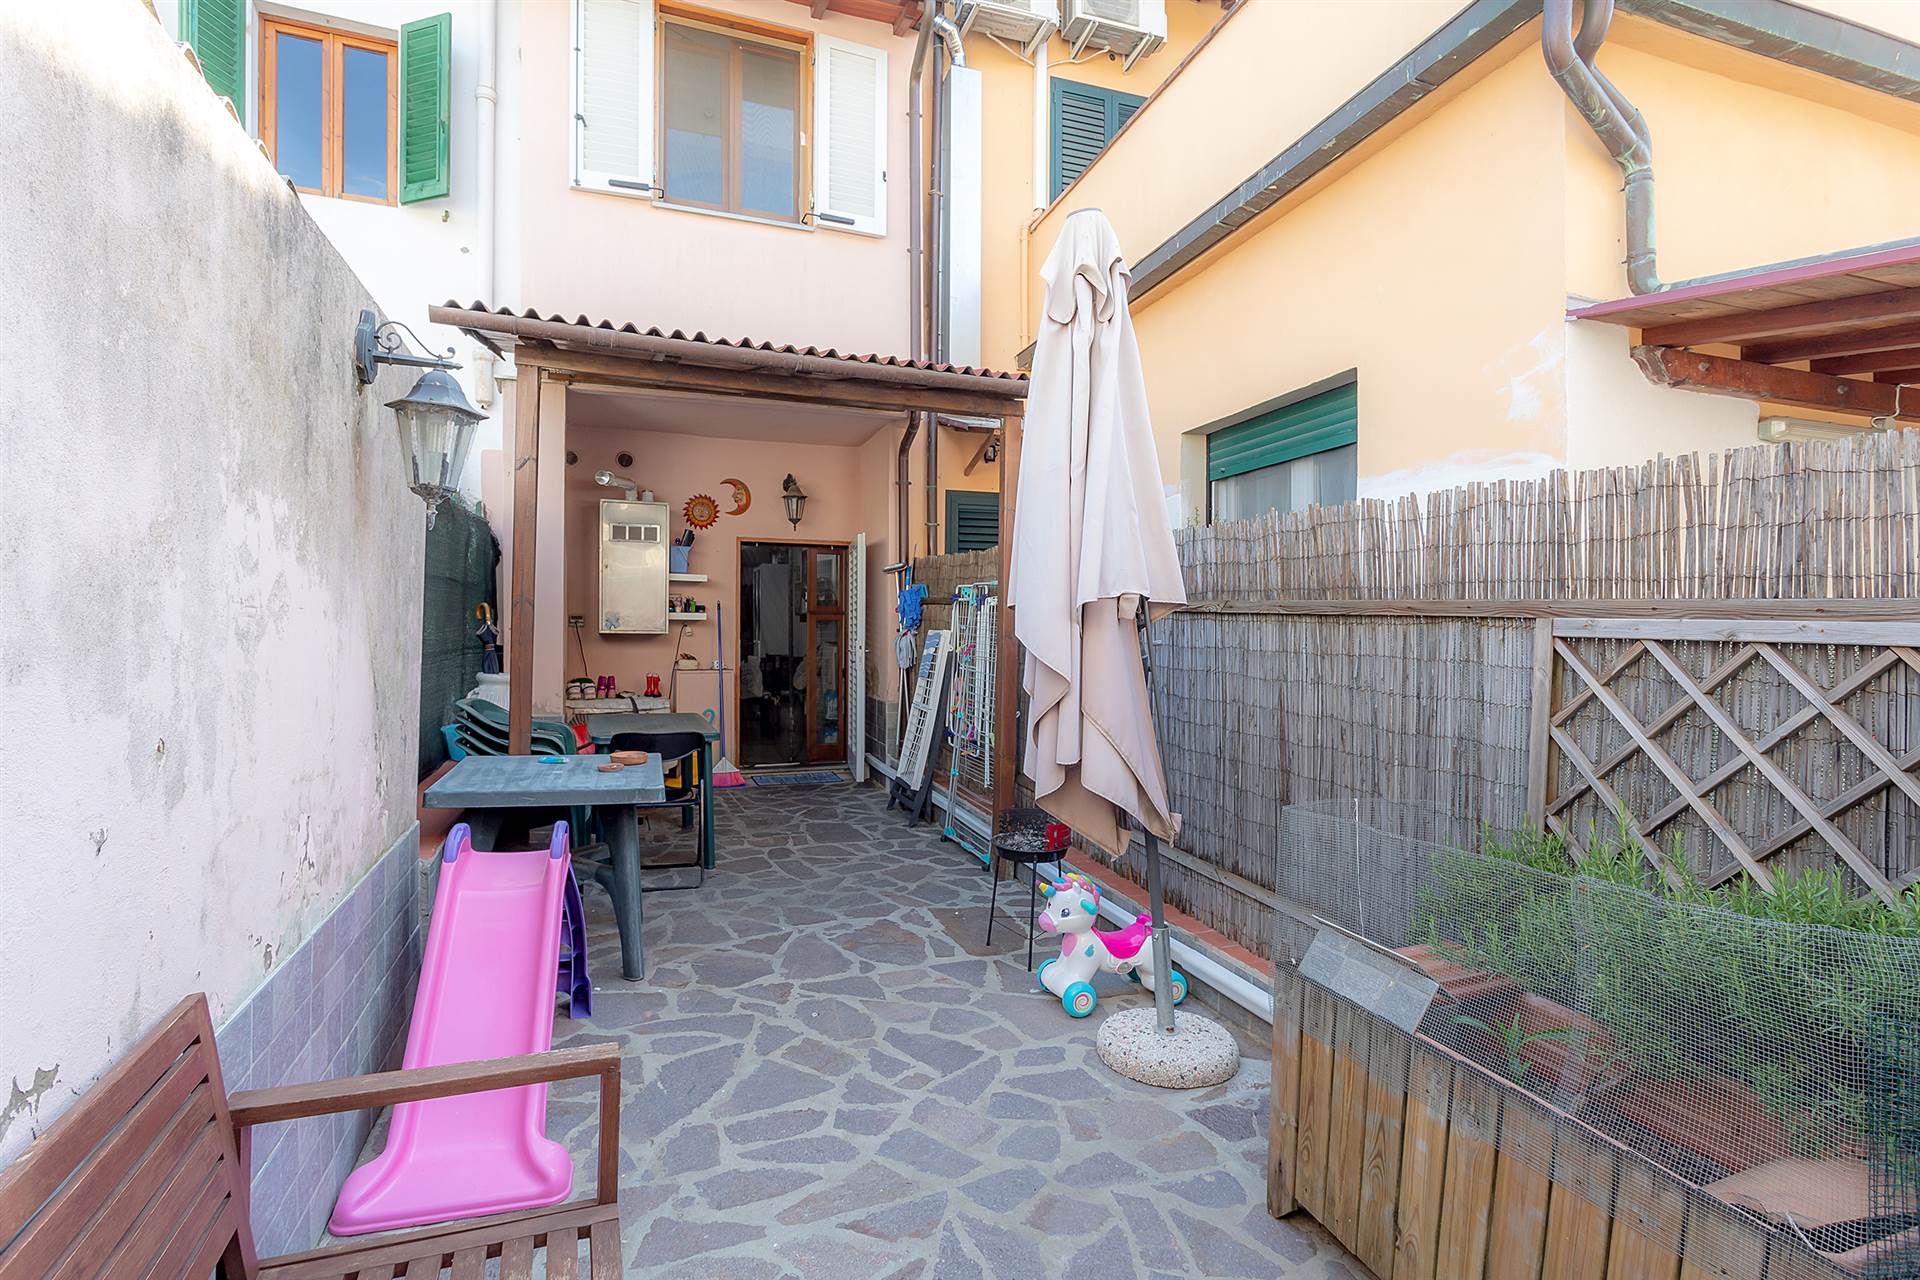 CENTRO, POGGIO A CAIANO, Terraced house for sale of 99 Sq. mt., Excellent Condition, Heating Individual heating system, Energetic class: G, placed at 